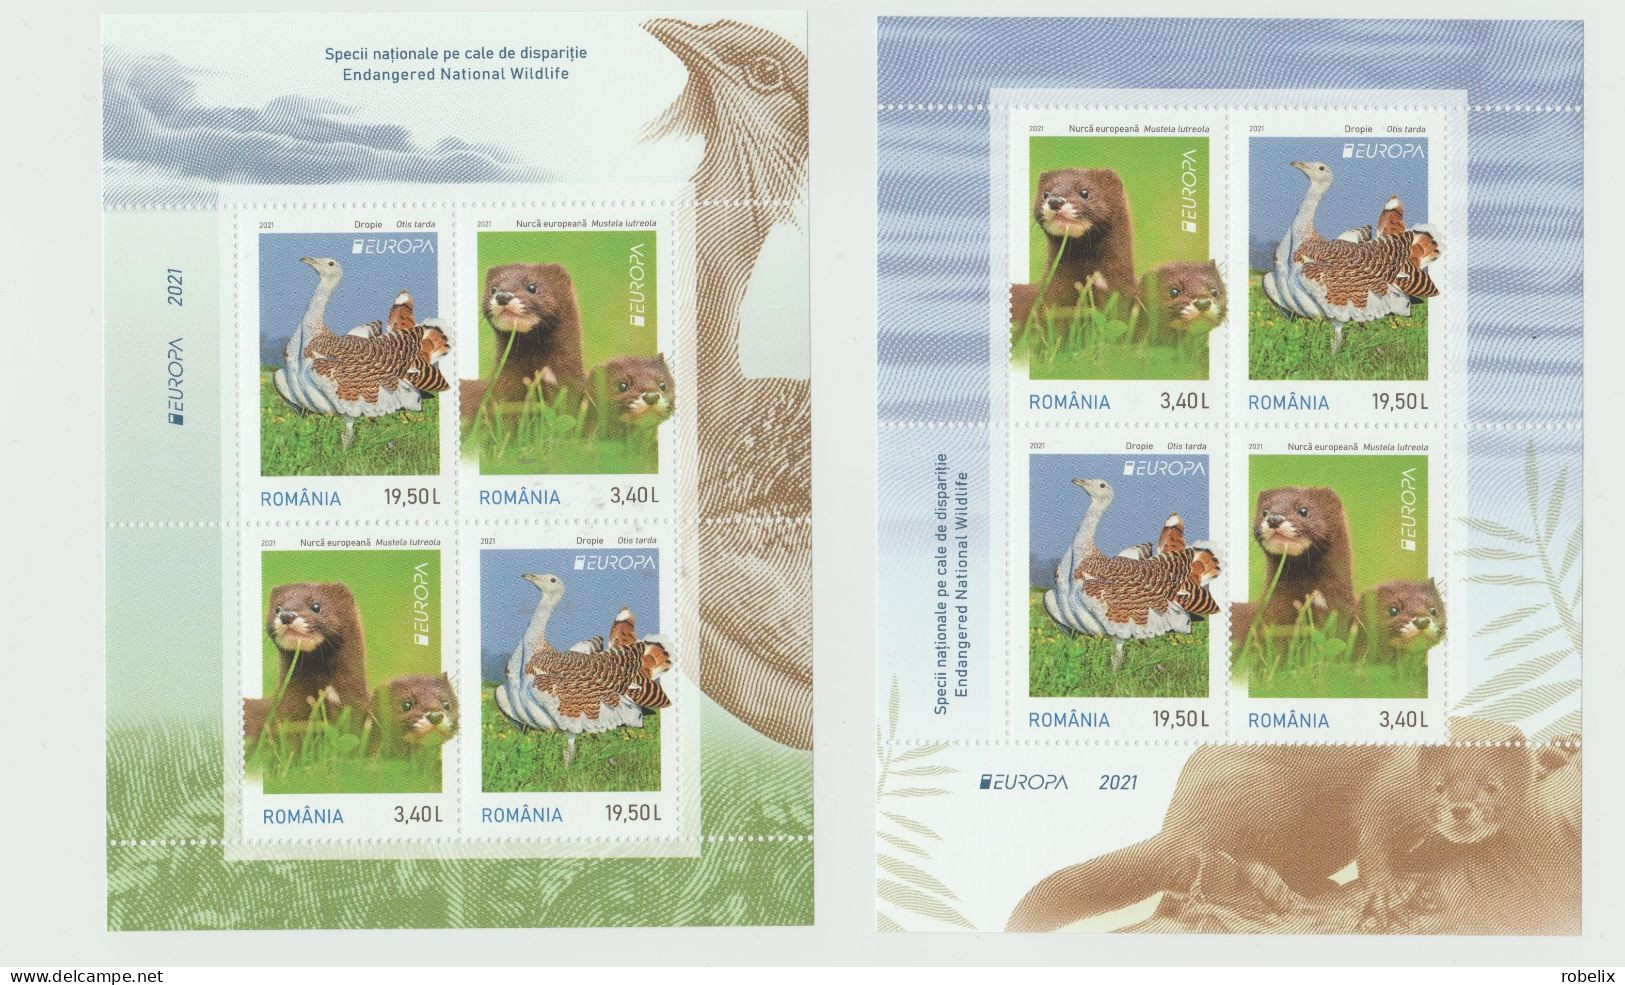 ROMANIA - EUROPA CEPT- 2021 - ENDANGERED  WILDLIFE - M/S - Blocks  I + II With 4 Stamps(2 Sets)  MNH** - 2021